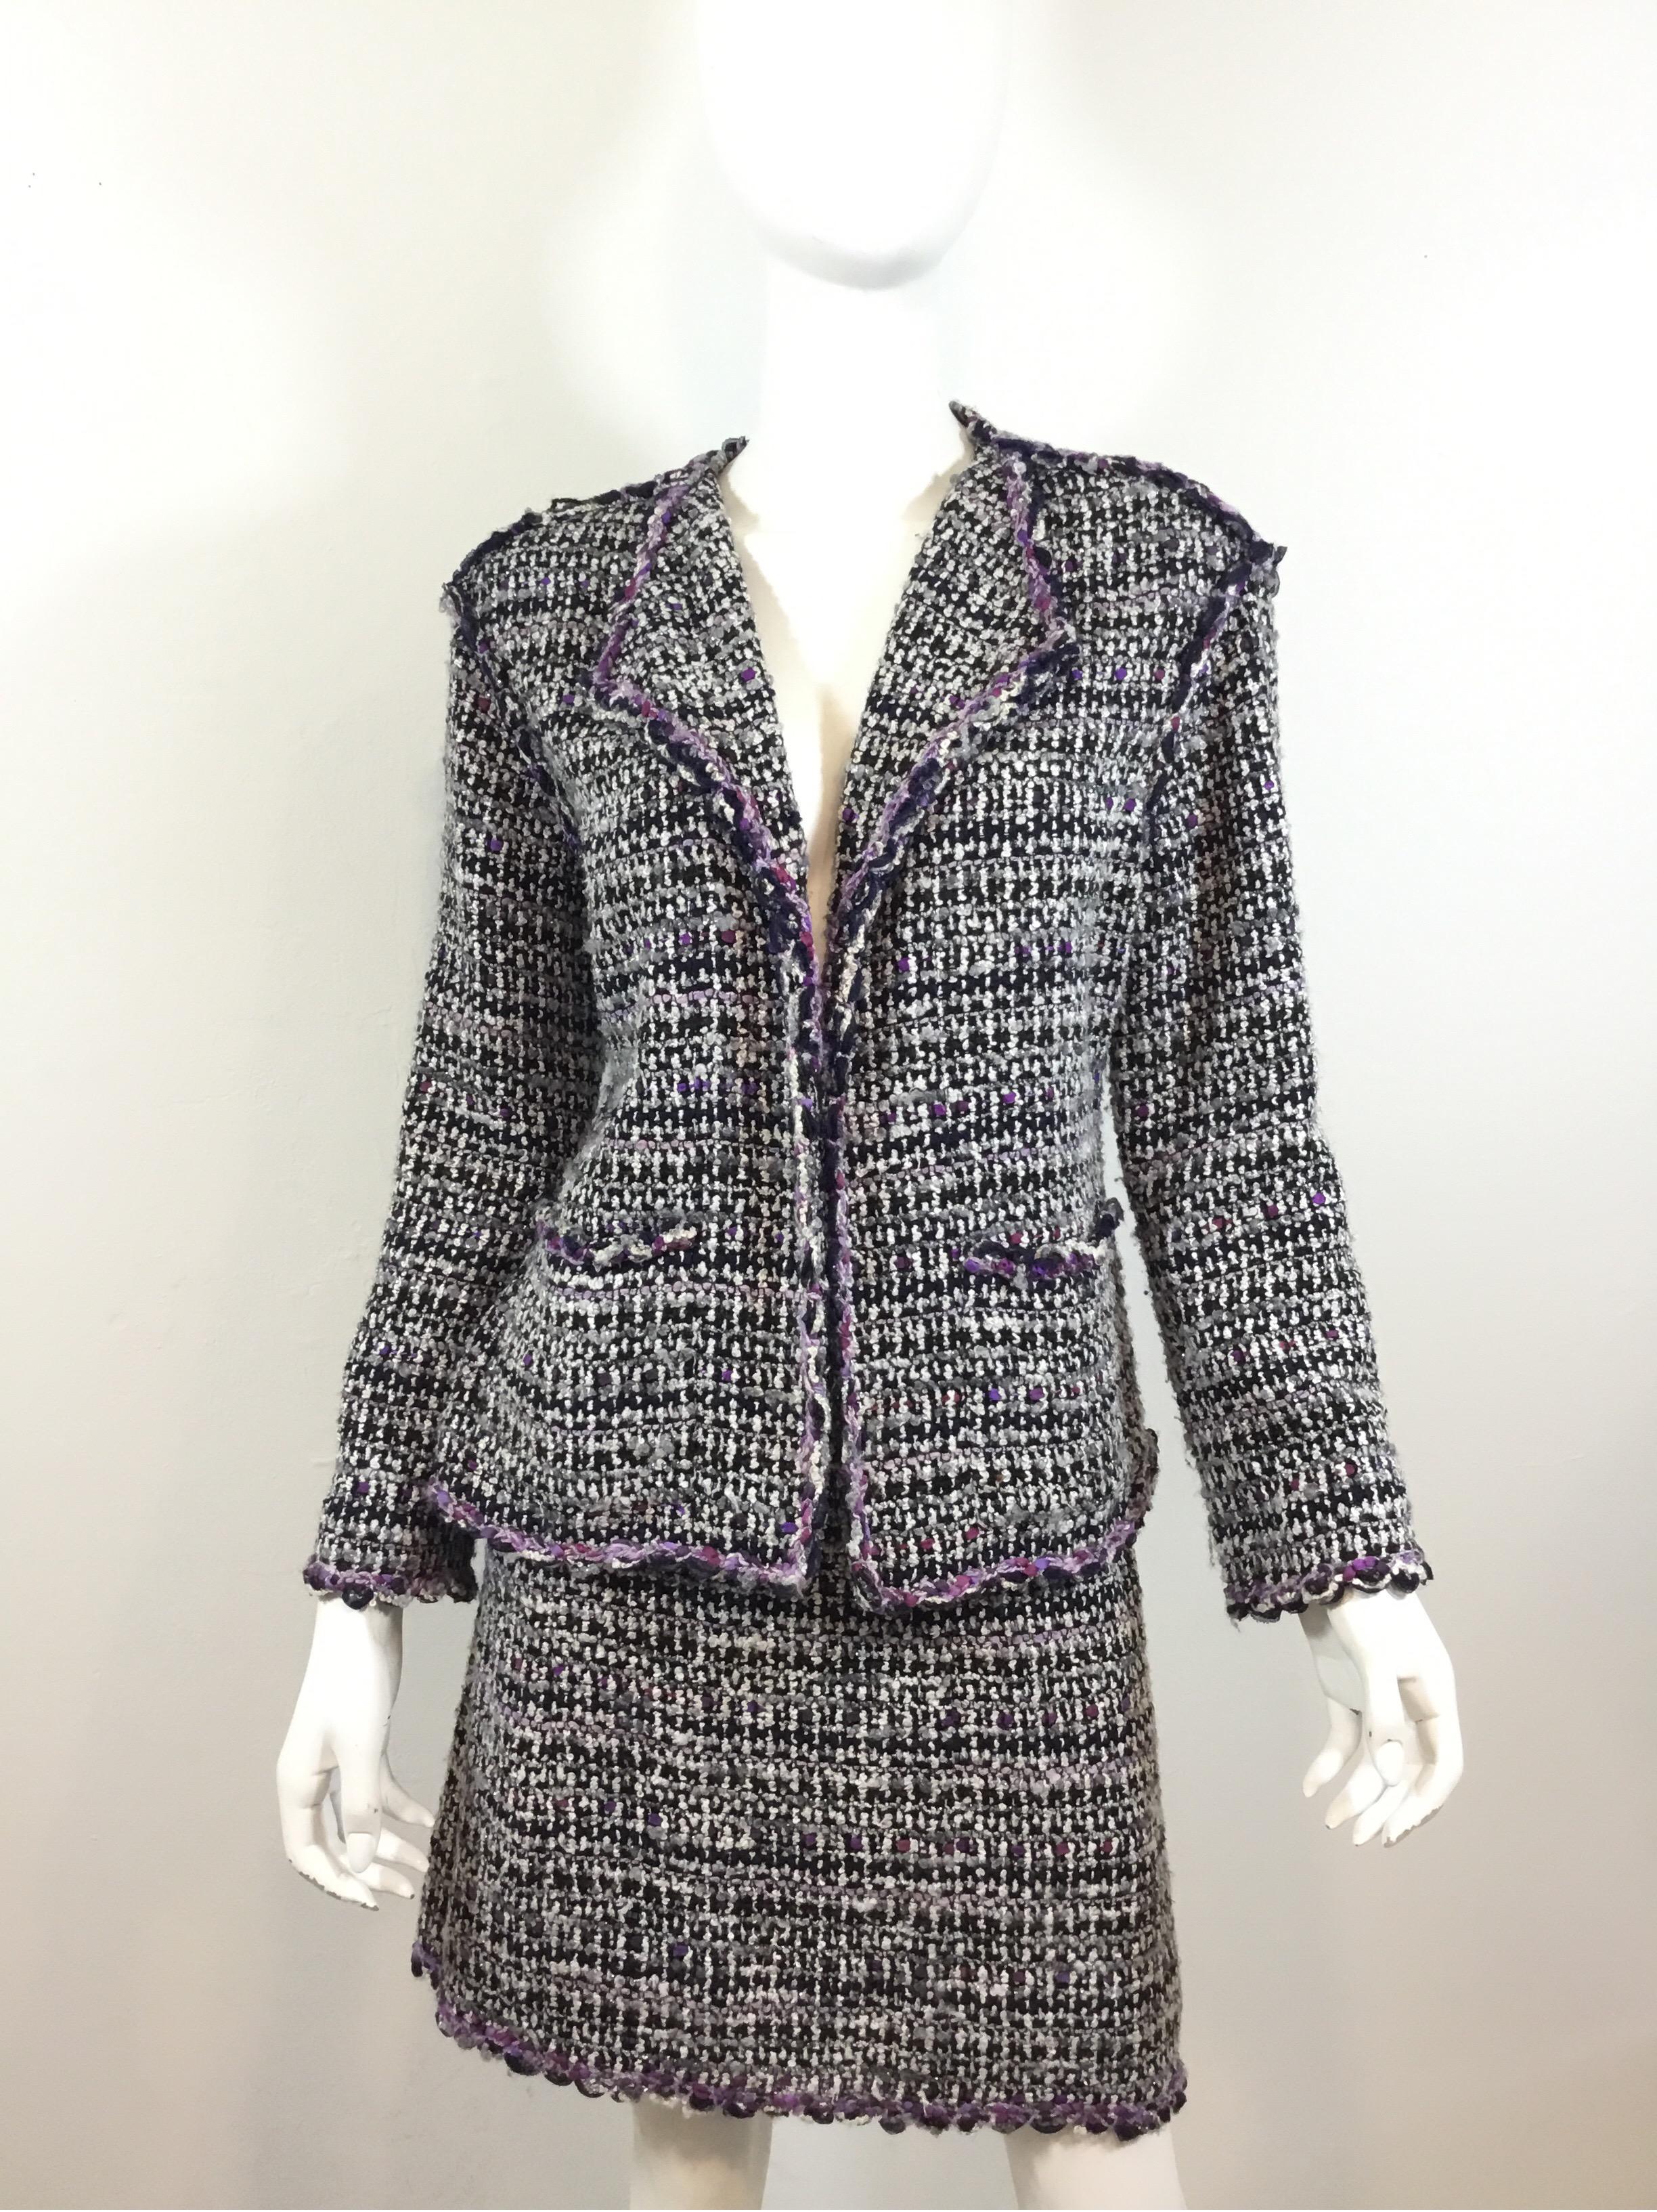 Chanel purple/black fantasy Tweed jacket and skirt suit— Jacket is a size 40, skirt is a size 42. Made in France.

Jacket has an open front, two patch pockets, and a full lining.
Skirt is fully lined and has a back zipper closure.

Jacket: bust 40”,